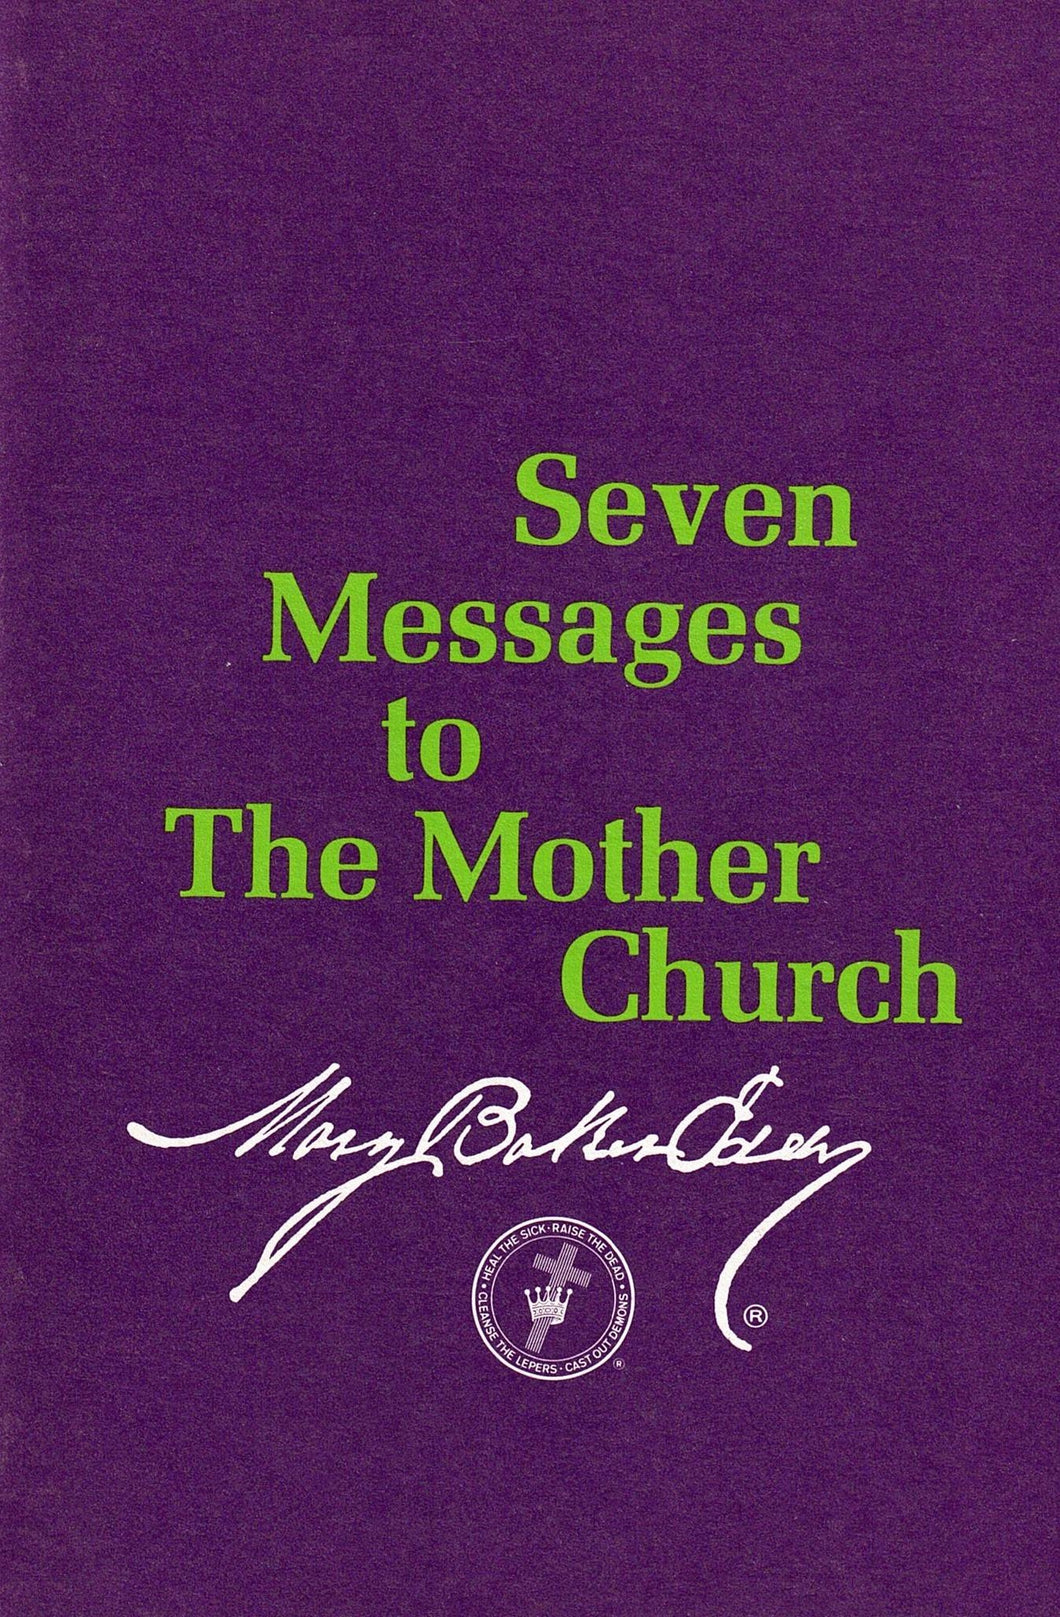 Seven Messages to The Mother Church